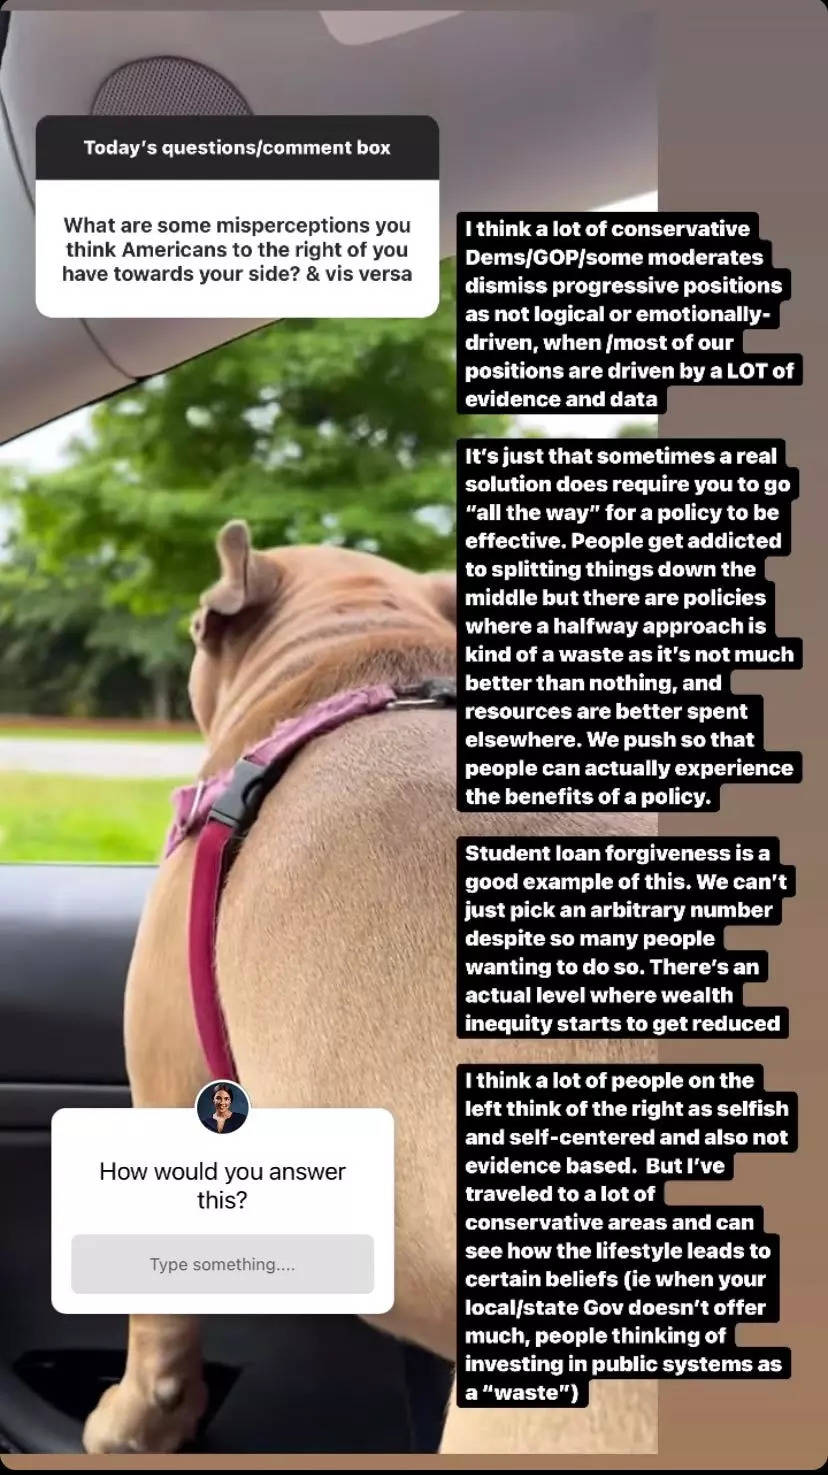 AOC responding to a question on her Instagram story